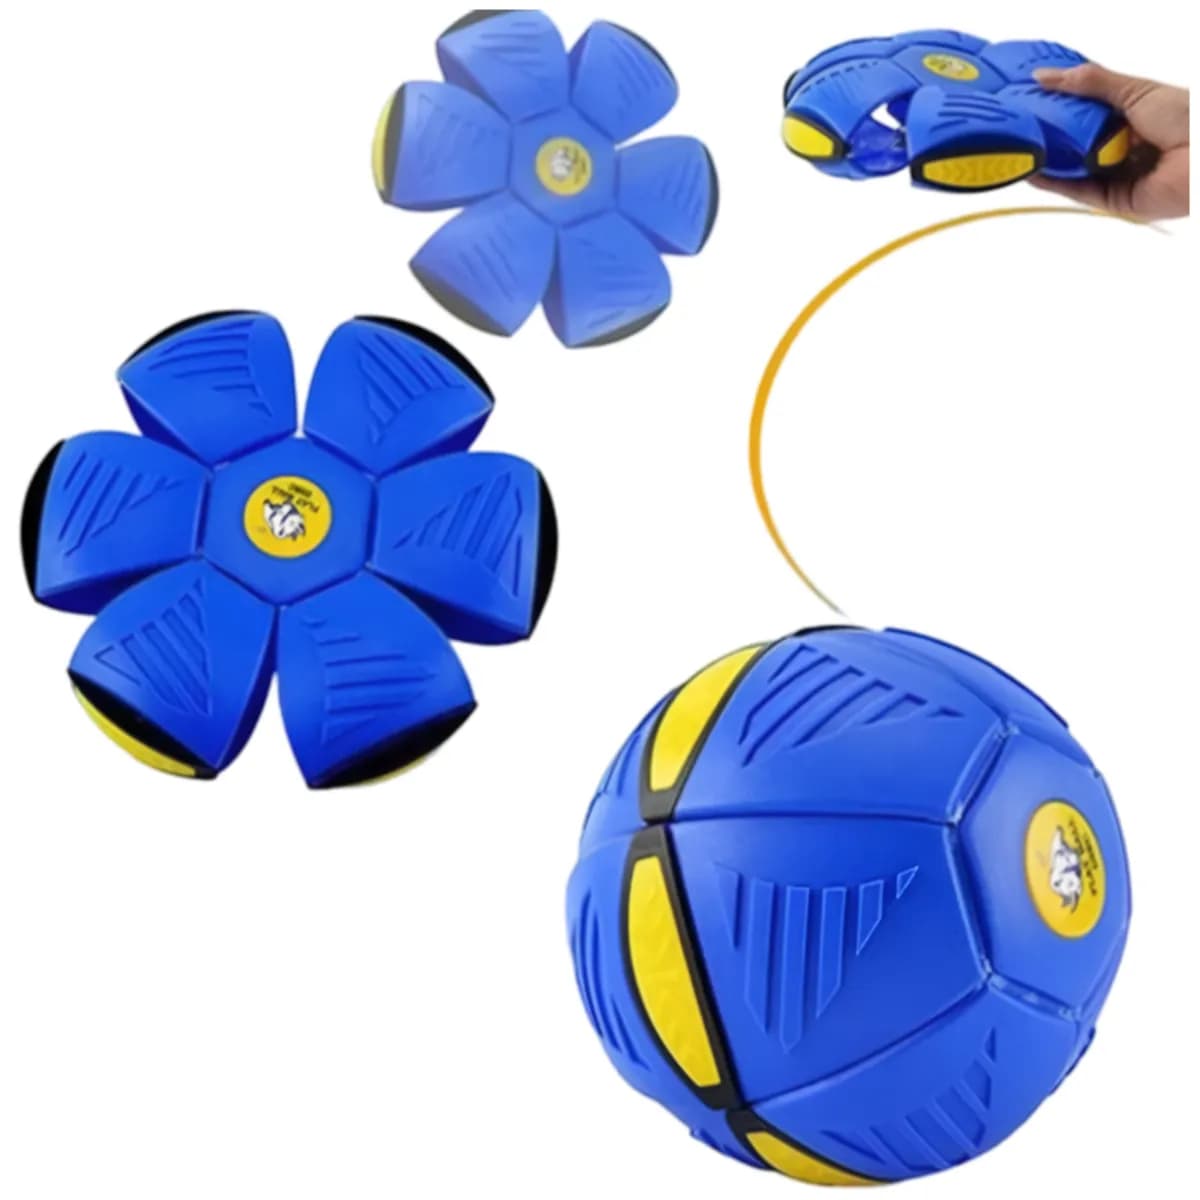 Playcast Magic Flying Disc Ball For Kids -  Assorted Colours 1  Piece - (PSFS42)